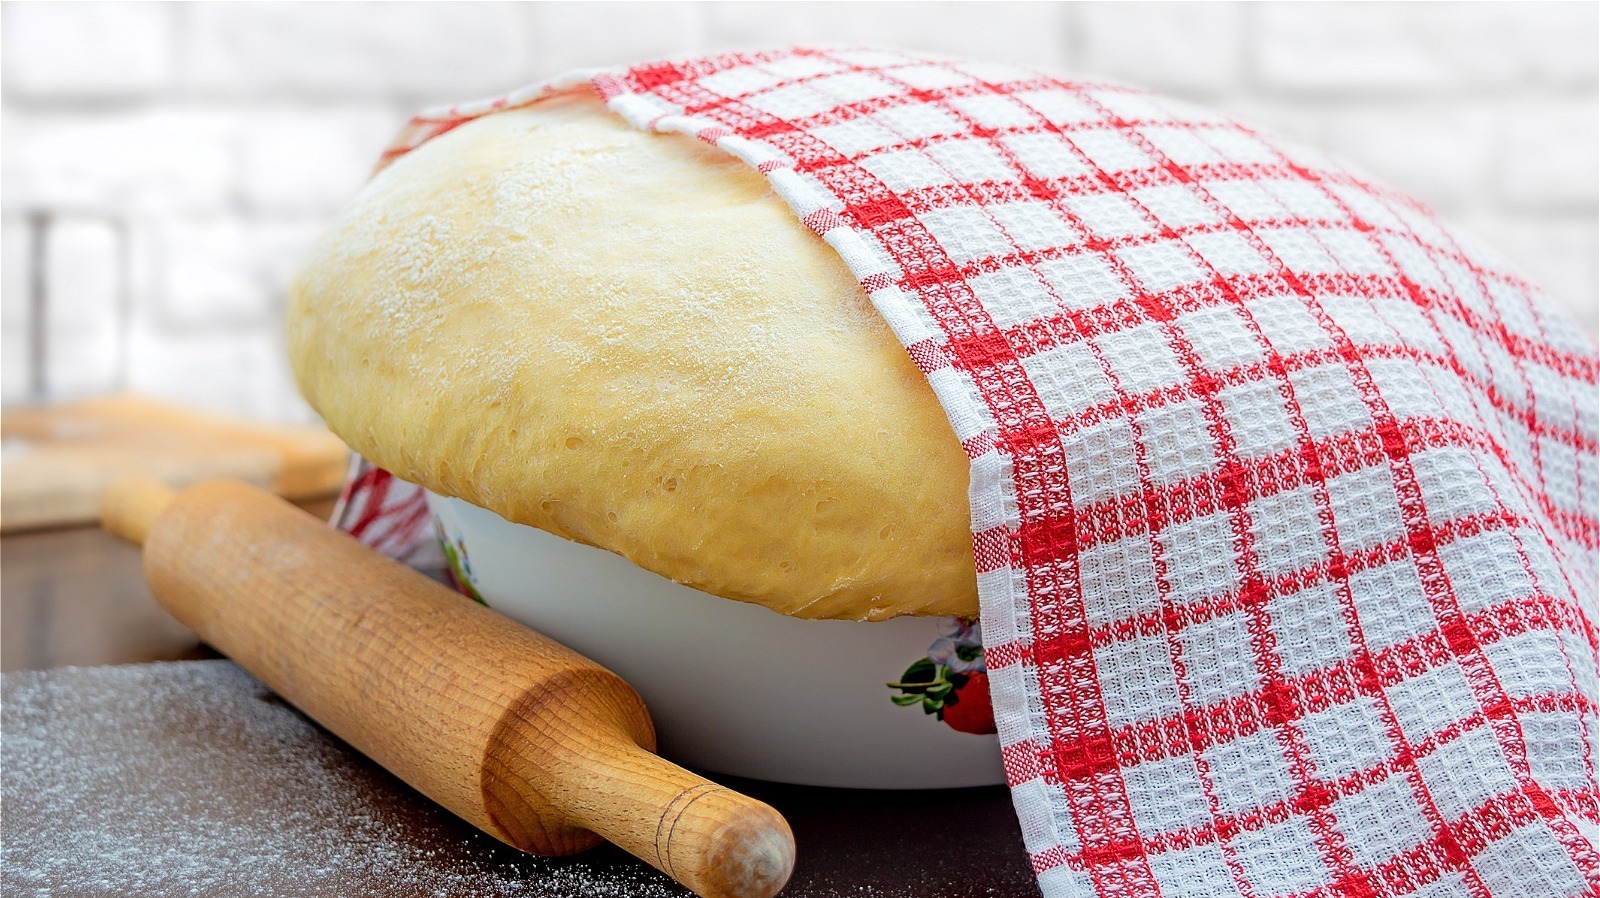 How To Know If Your Yeast Bread Dough Is Ready To Bake - Mashed